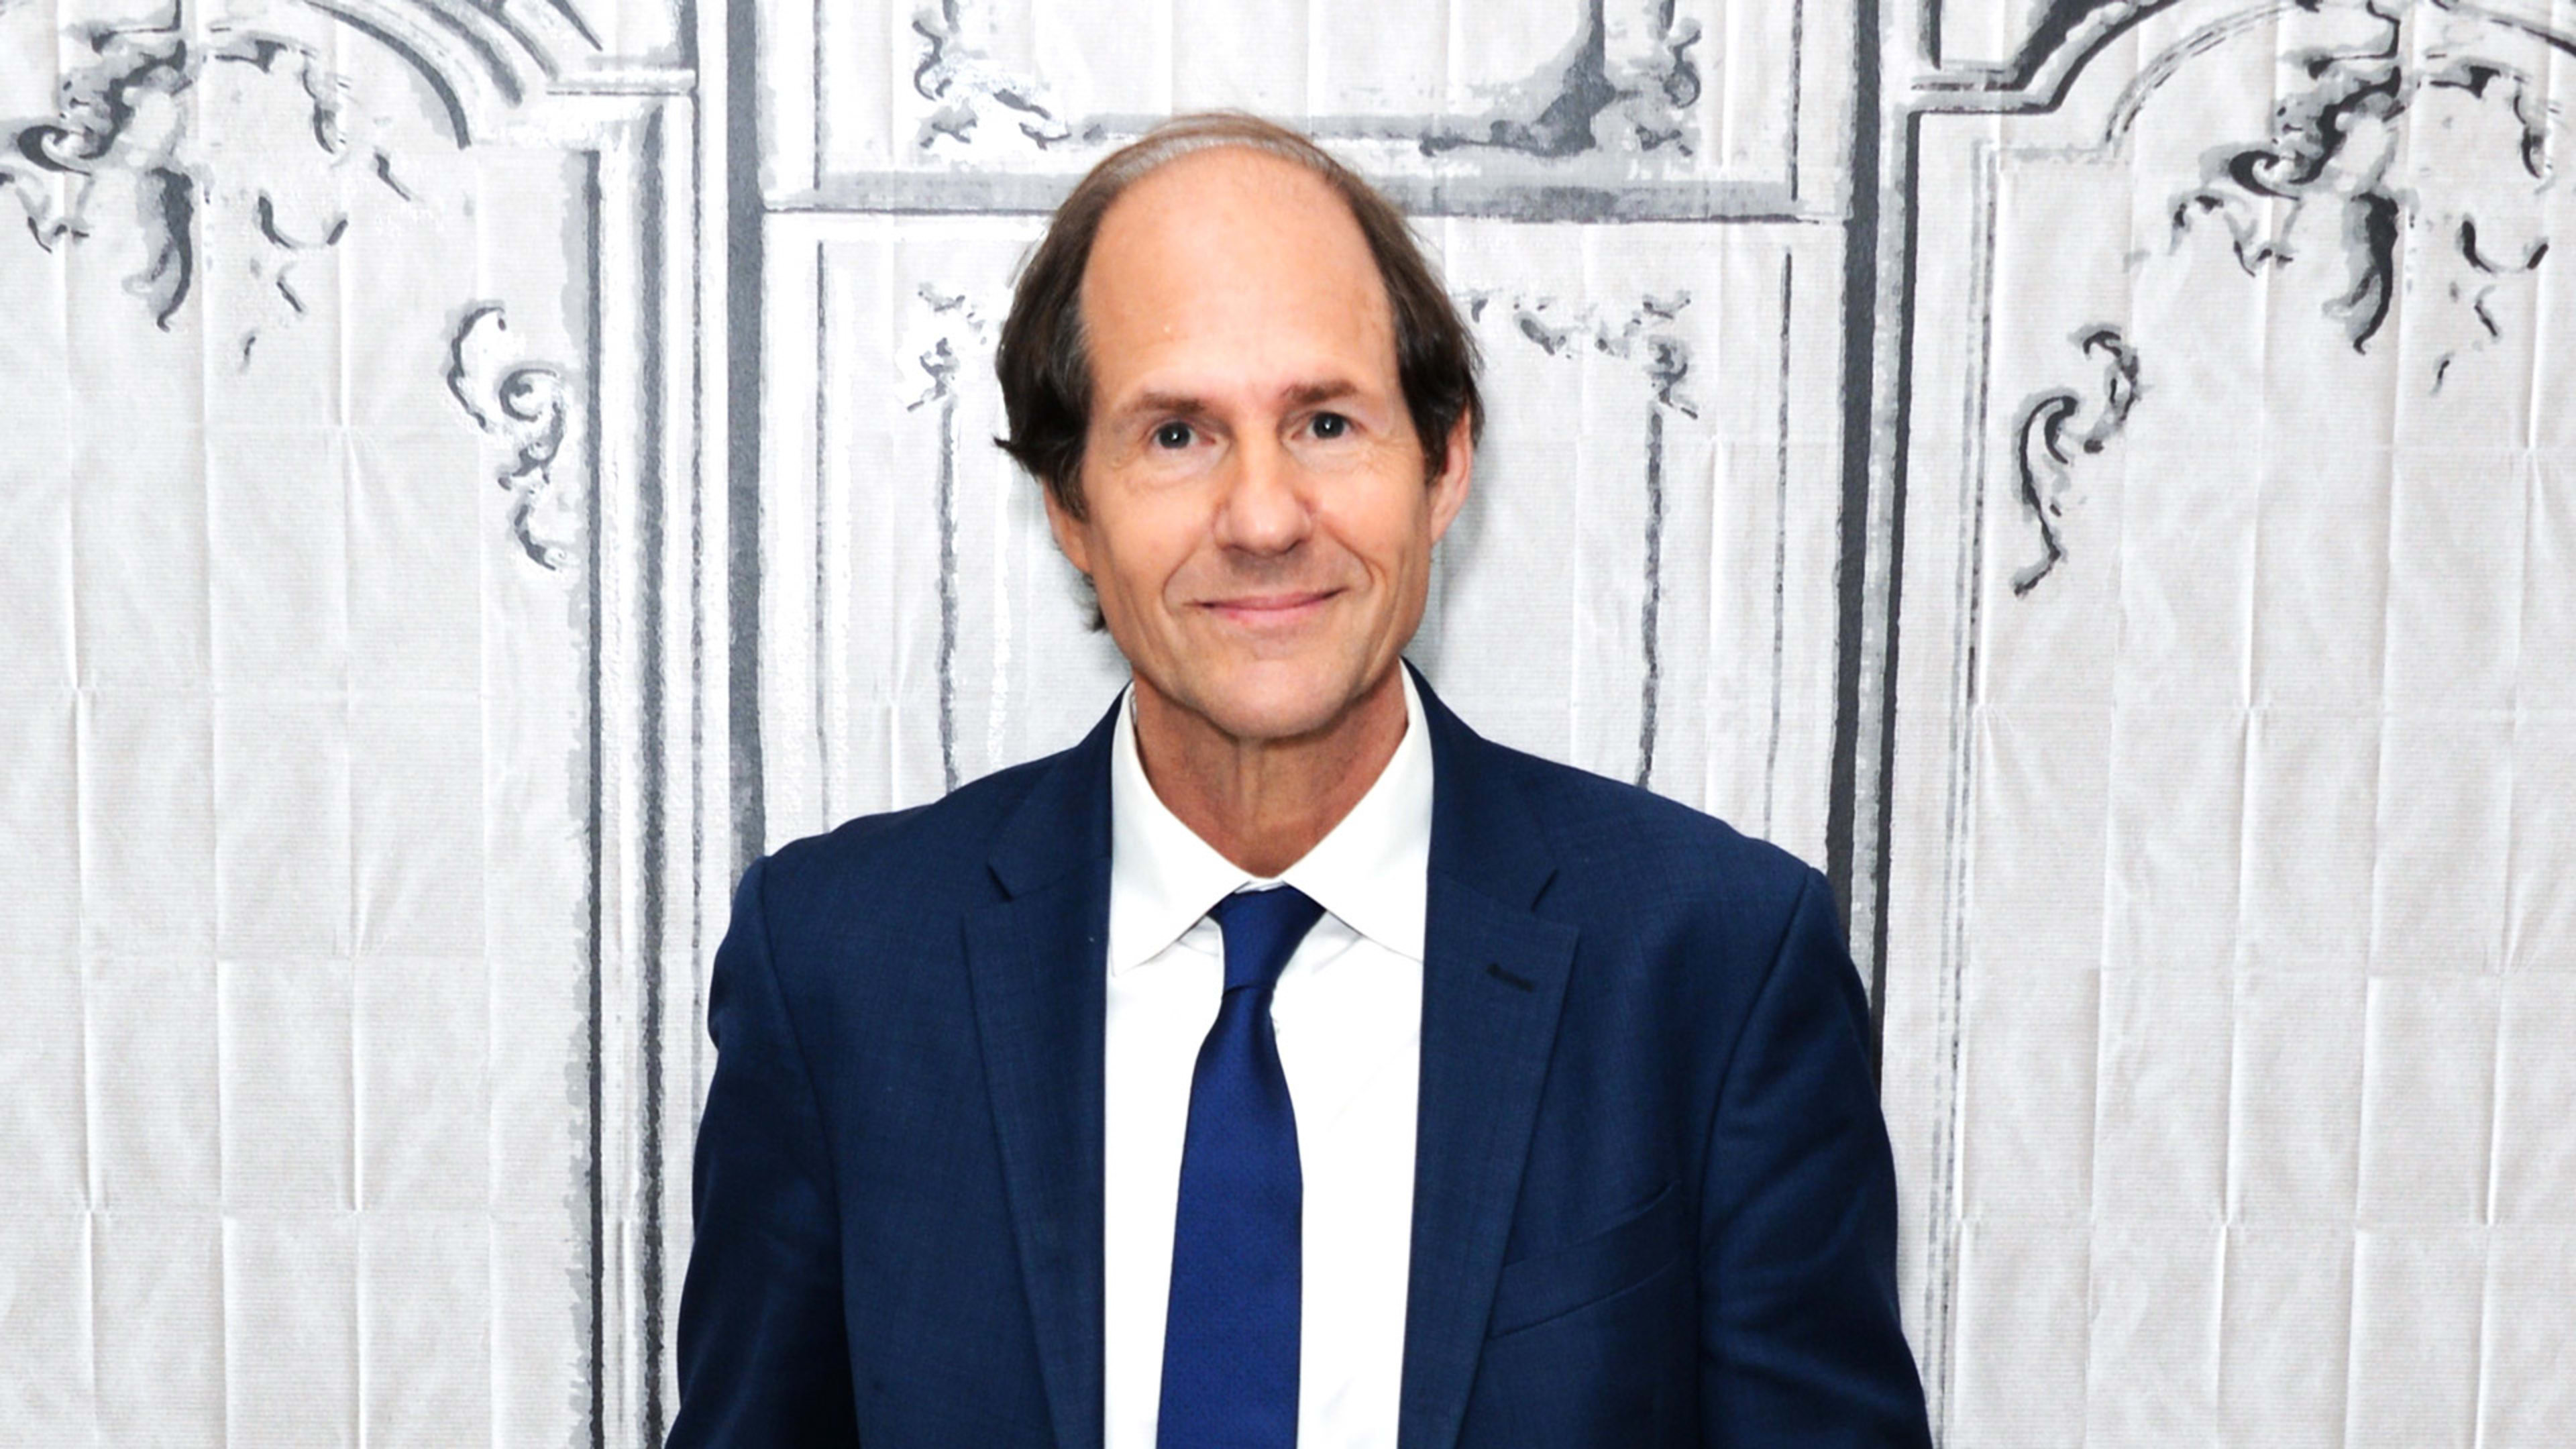 Cass Sunstein talks nudging, and knowing what works and what doesn’t